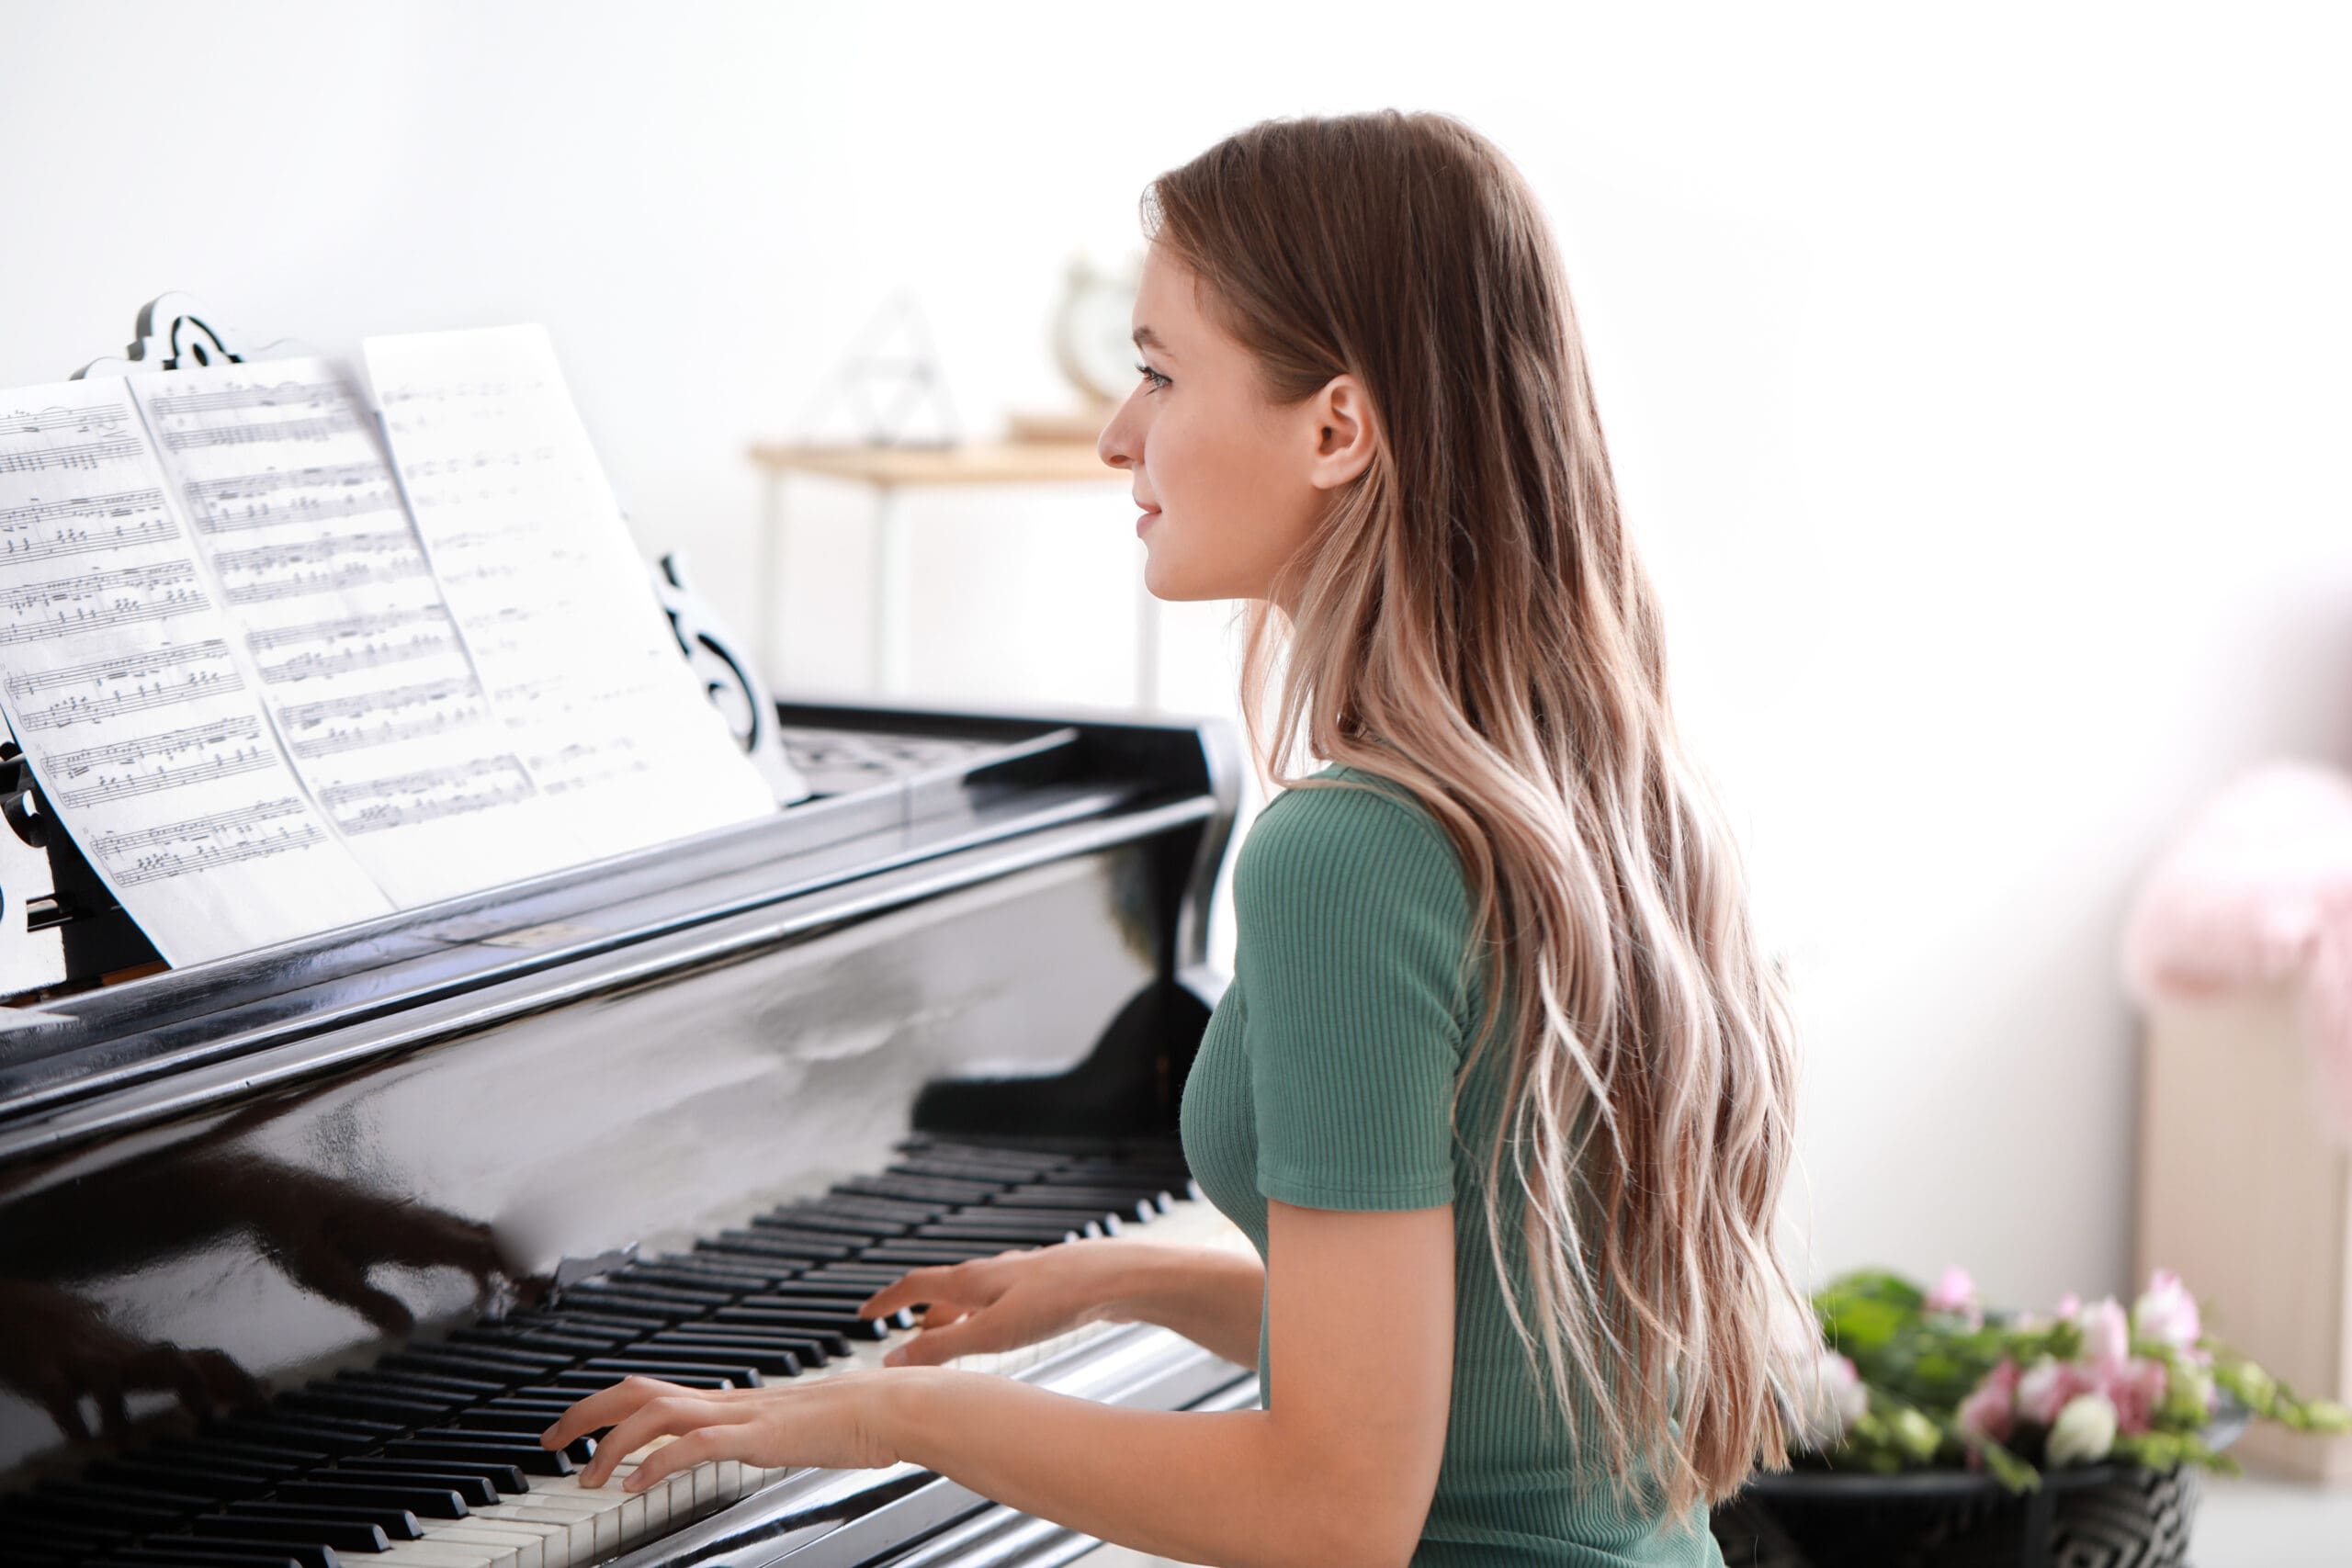 Introduction to learning the piano as an adult beginner